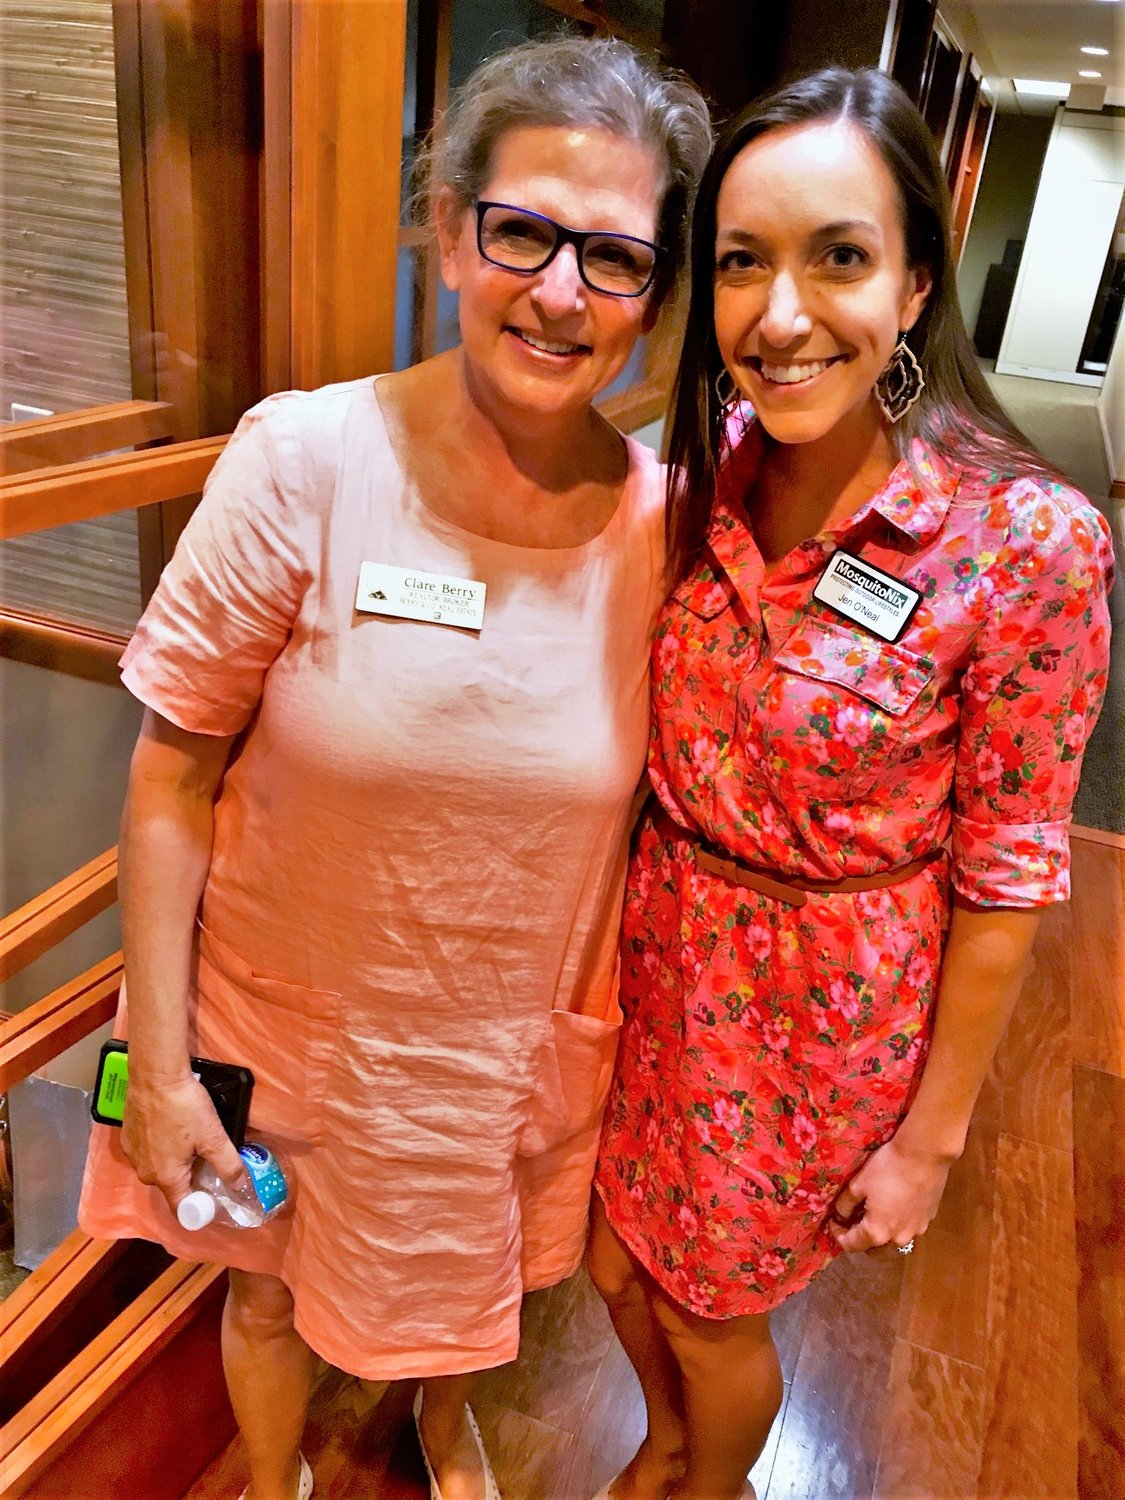 (Left to Right) Claire Berry of Berry & Co. Real Estate and Jennifer O’Neal of MosquitoNix Jacksonville network at Chamber Before Hours.